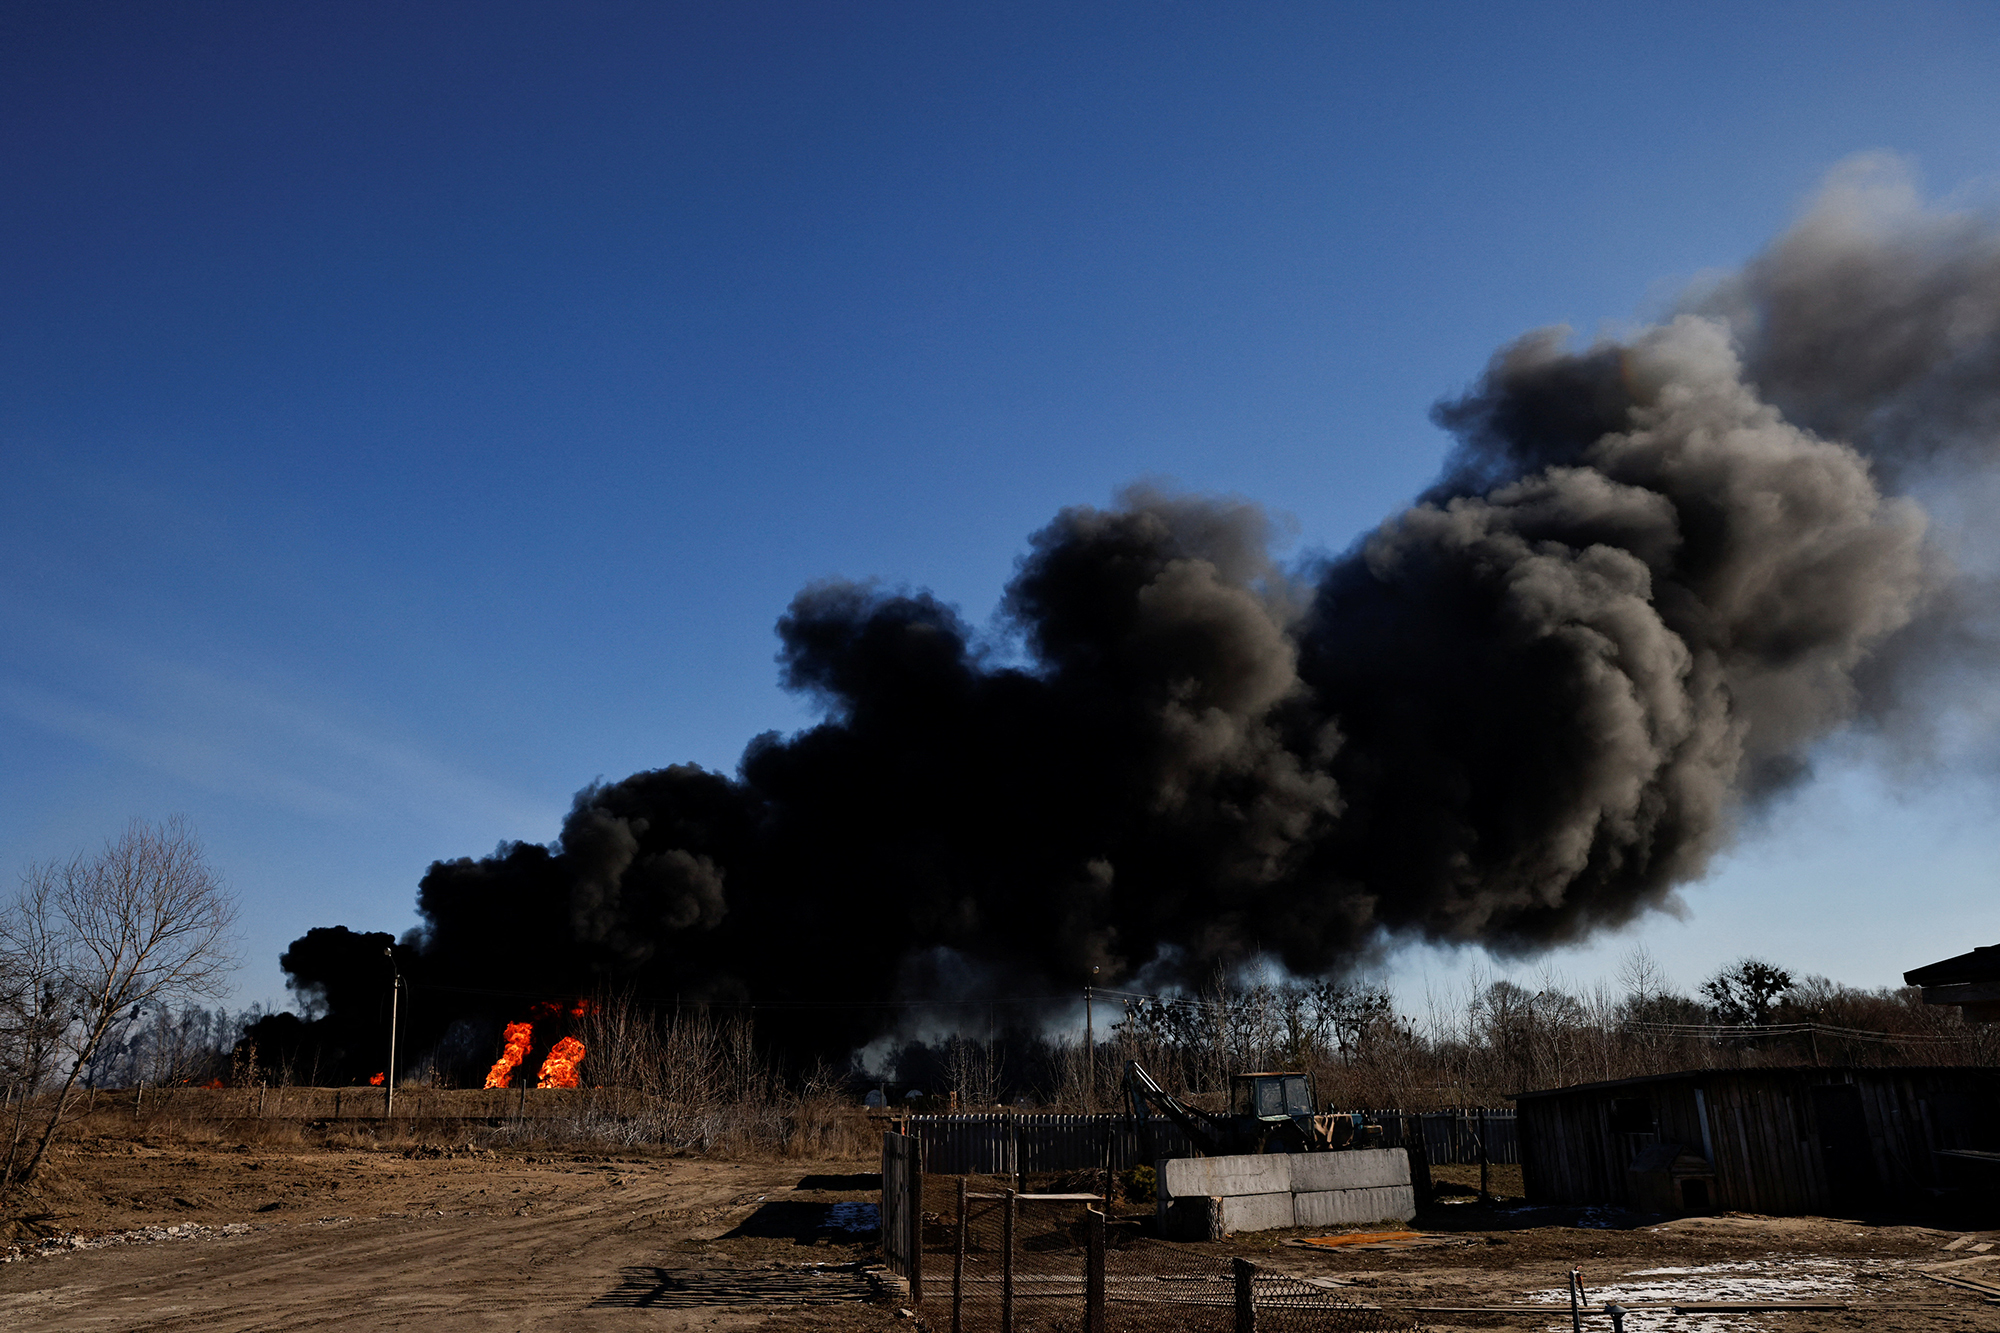 A column of smoke rises from the burning fuel tanks at the Vasylkov airbase in Ukraine on March 12. 